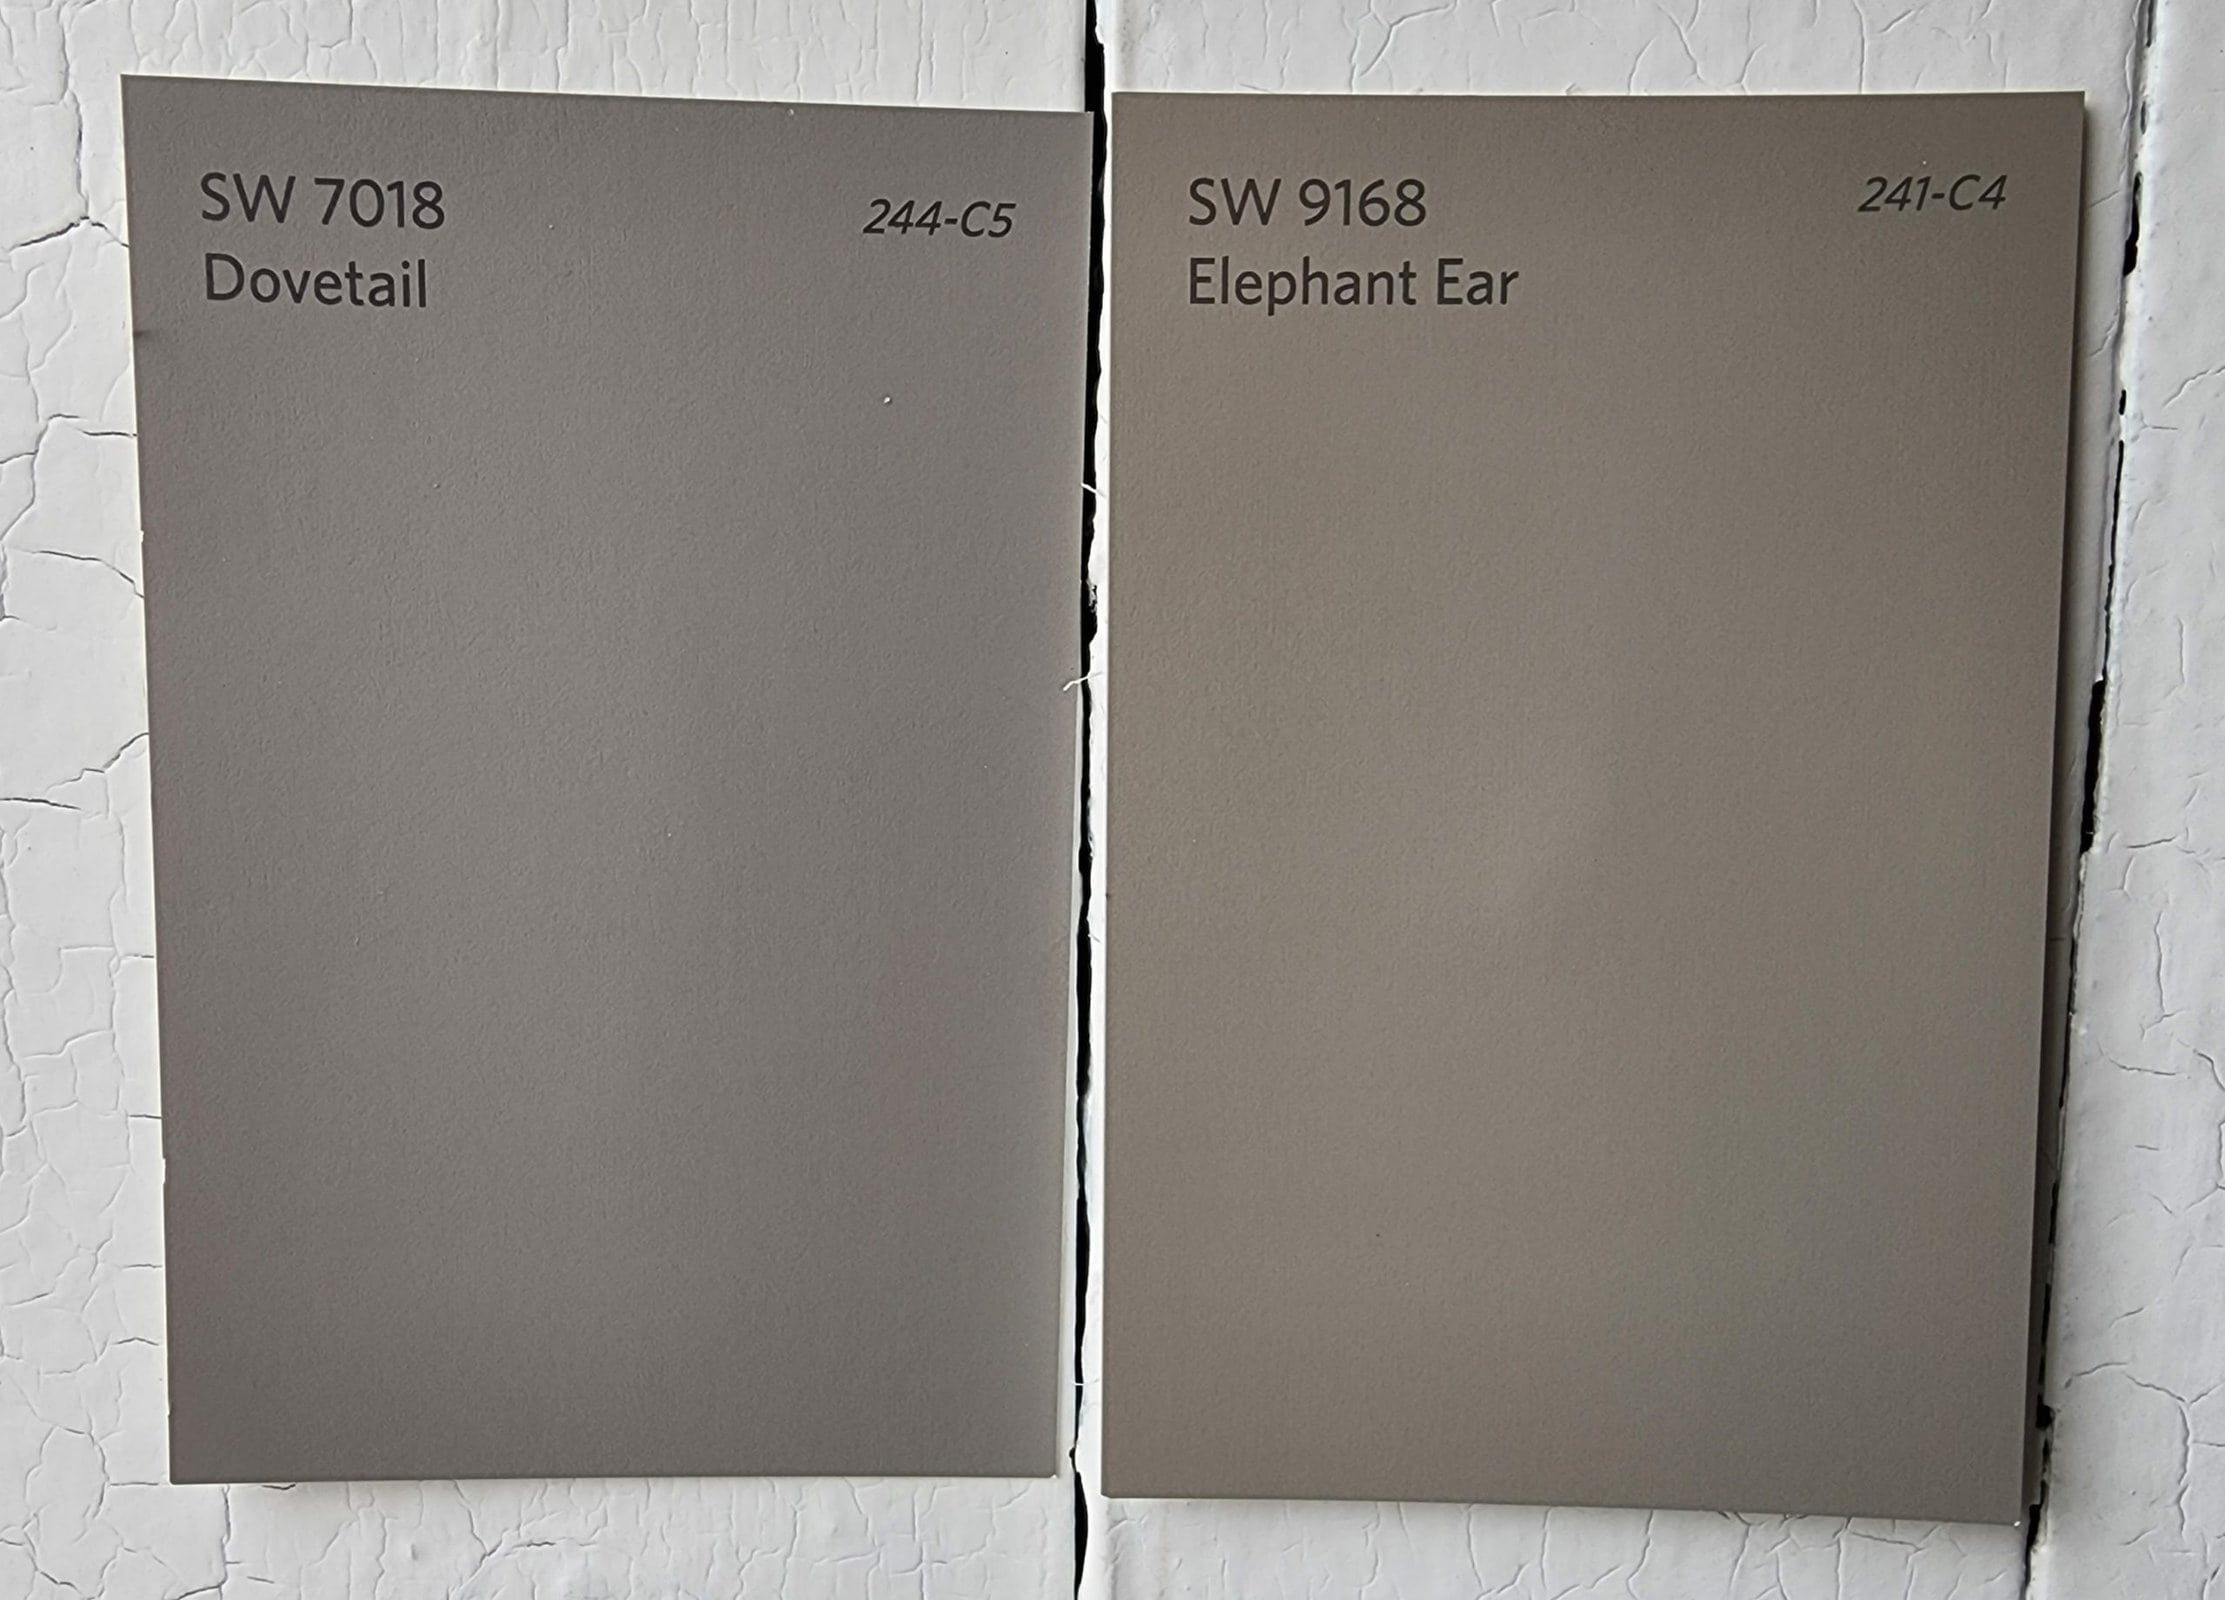  Dovetail vs Elephant Ear by Sherwin Williams scaled